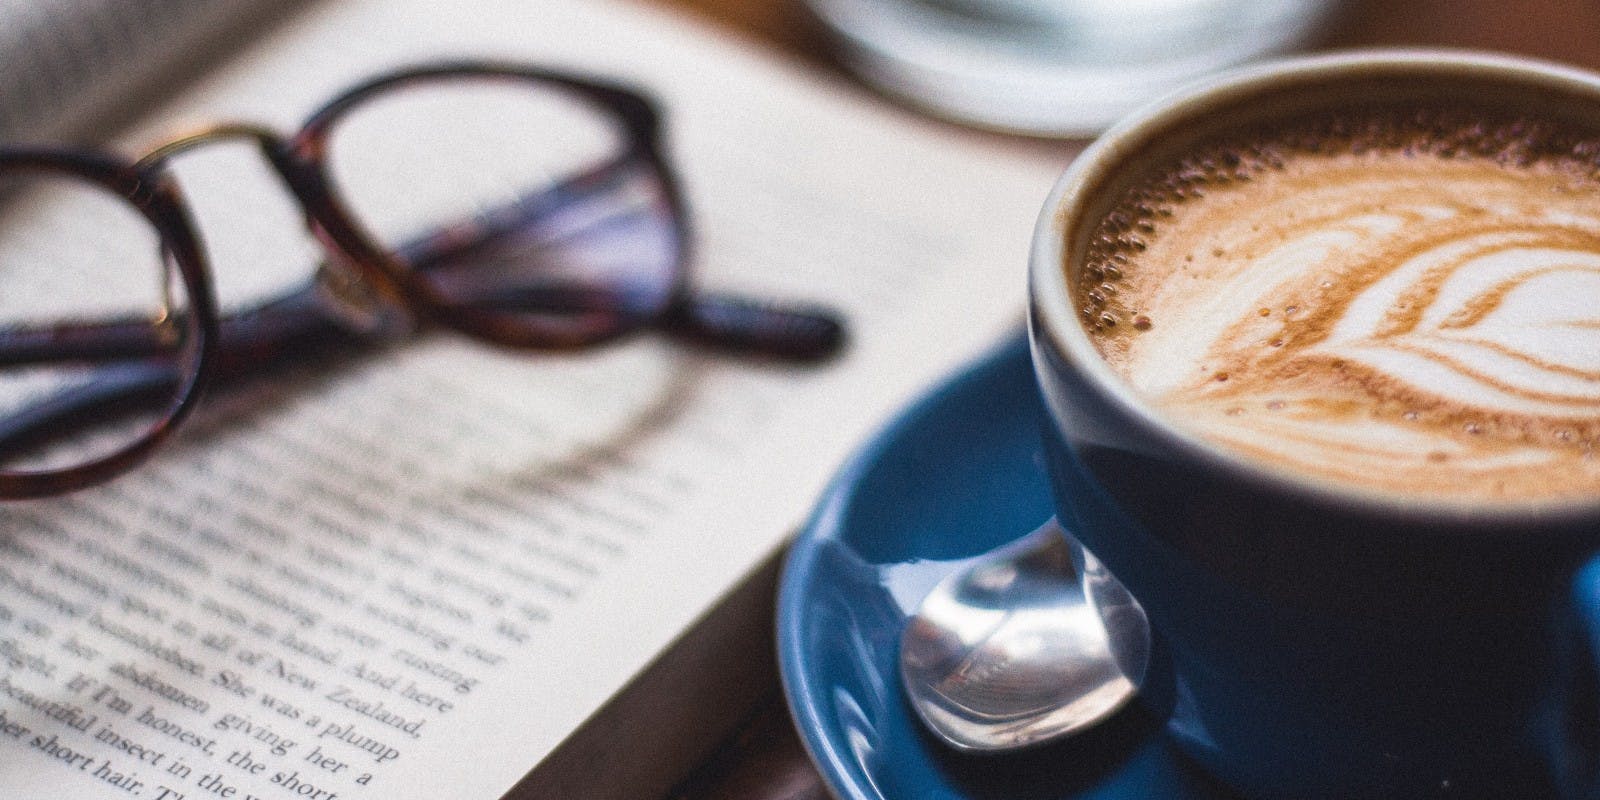 What to read next based on your favourite coffee order